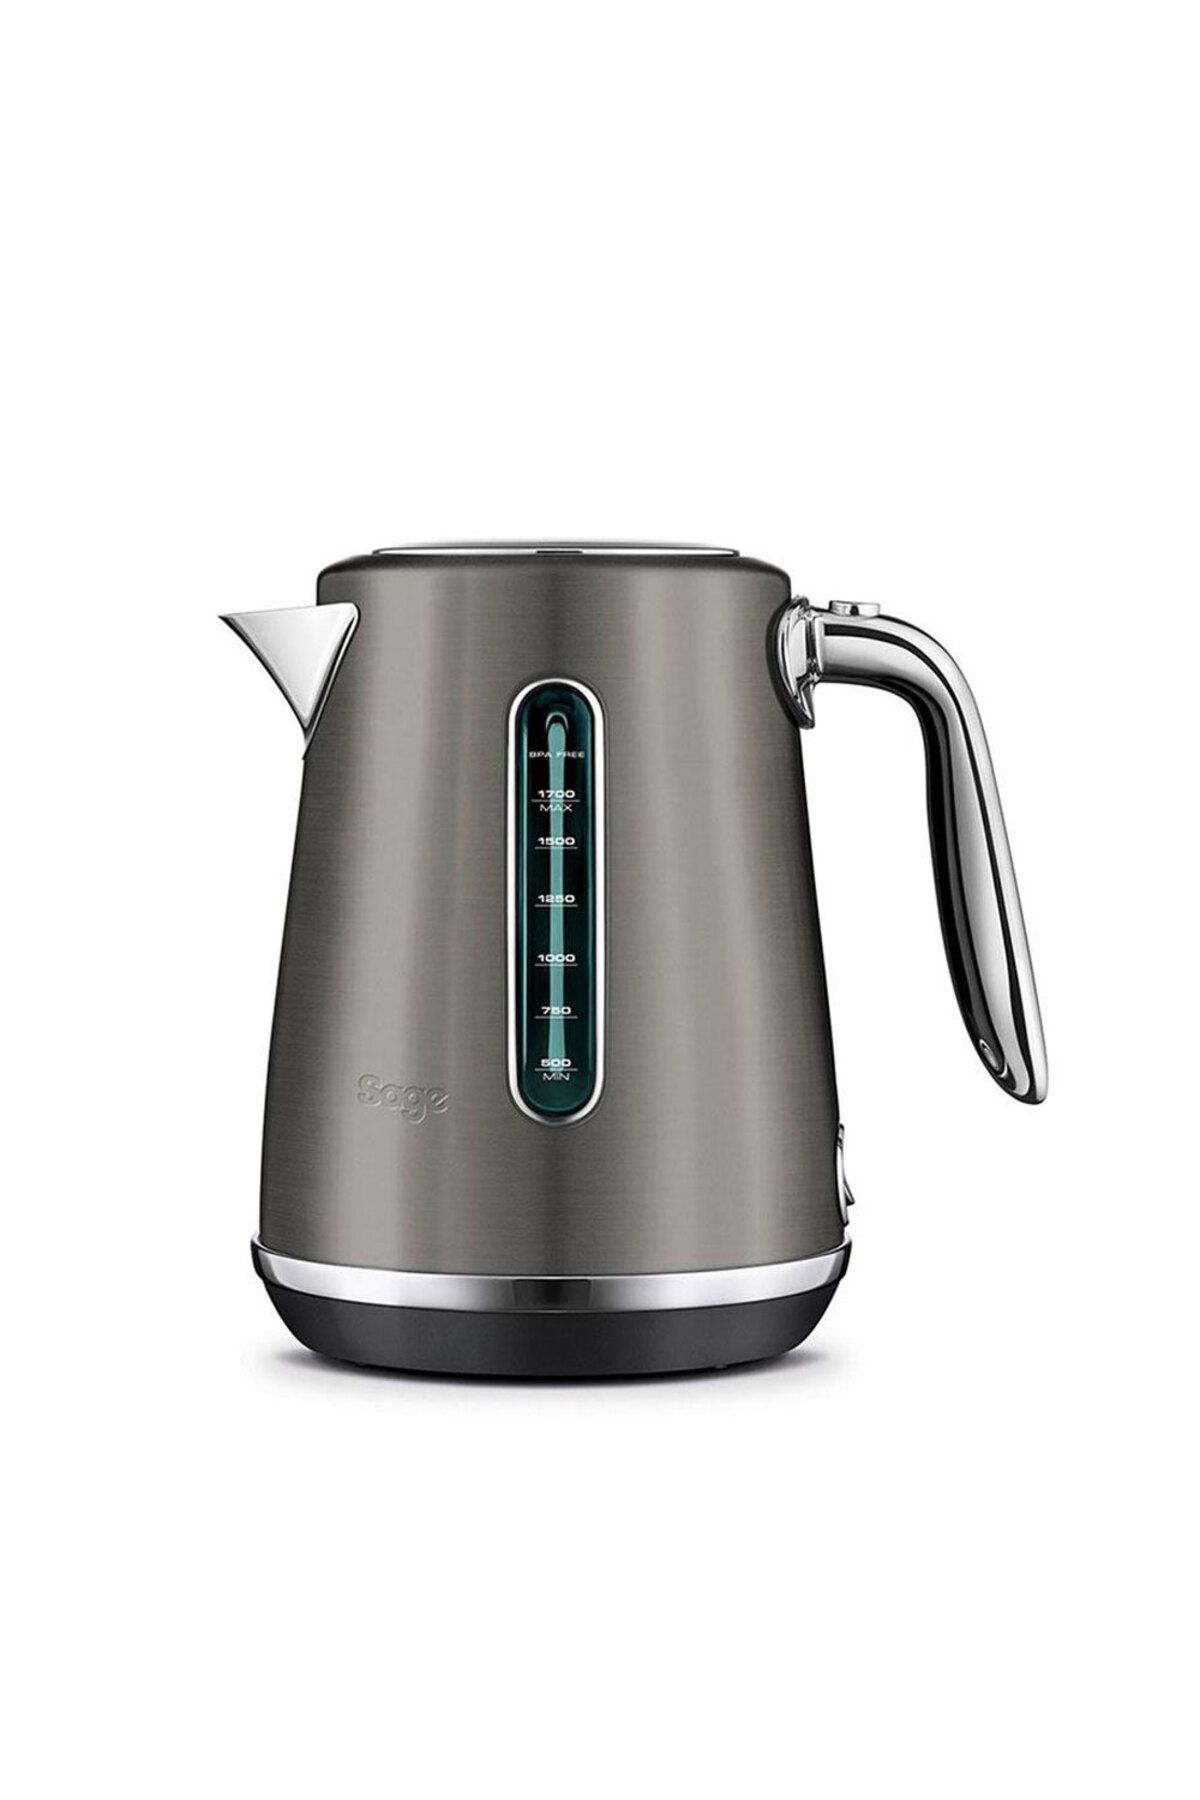 Sage Ske735 The Soft Top Luxe Kettle